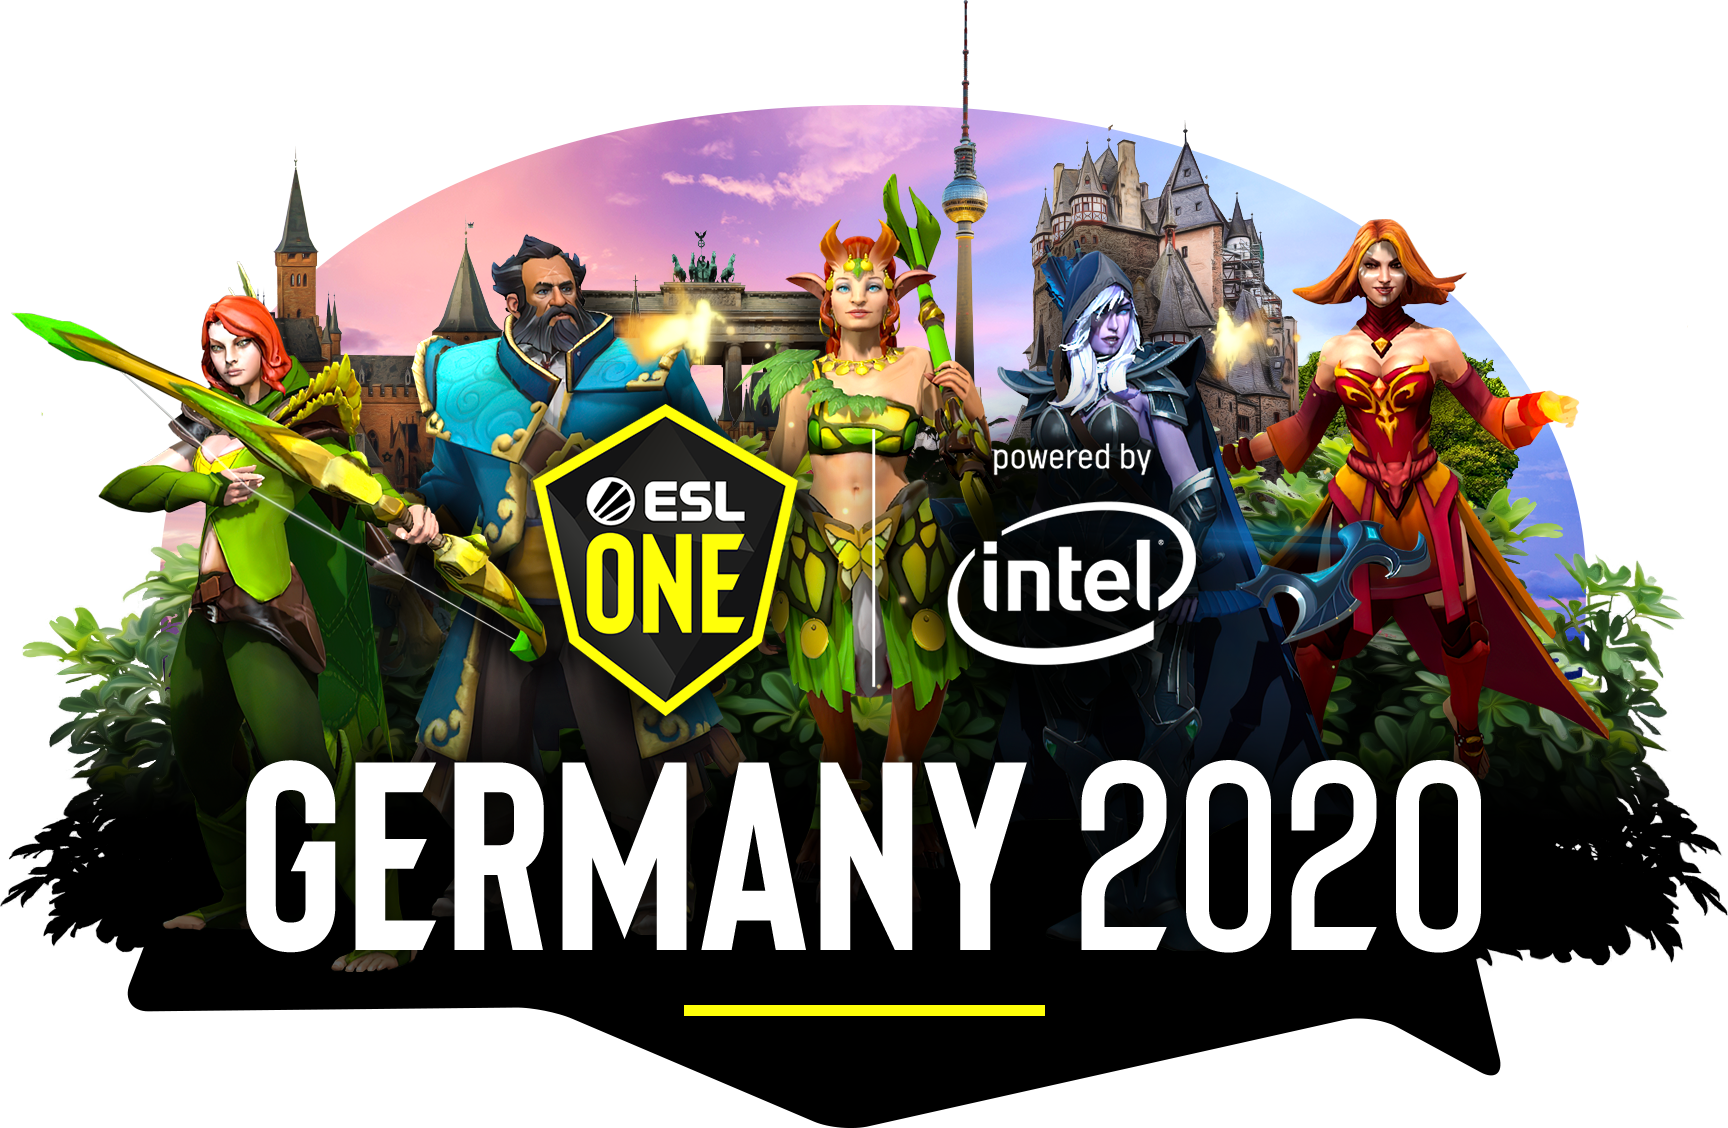 We will play in ESL One Germany Online Virtus.pro